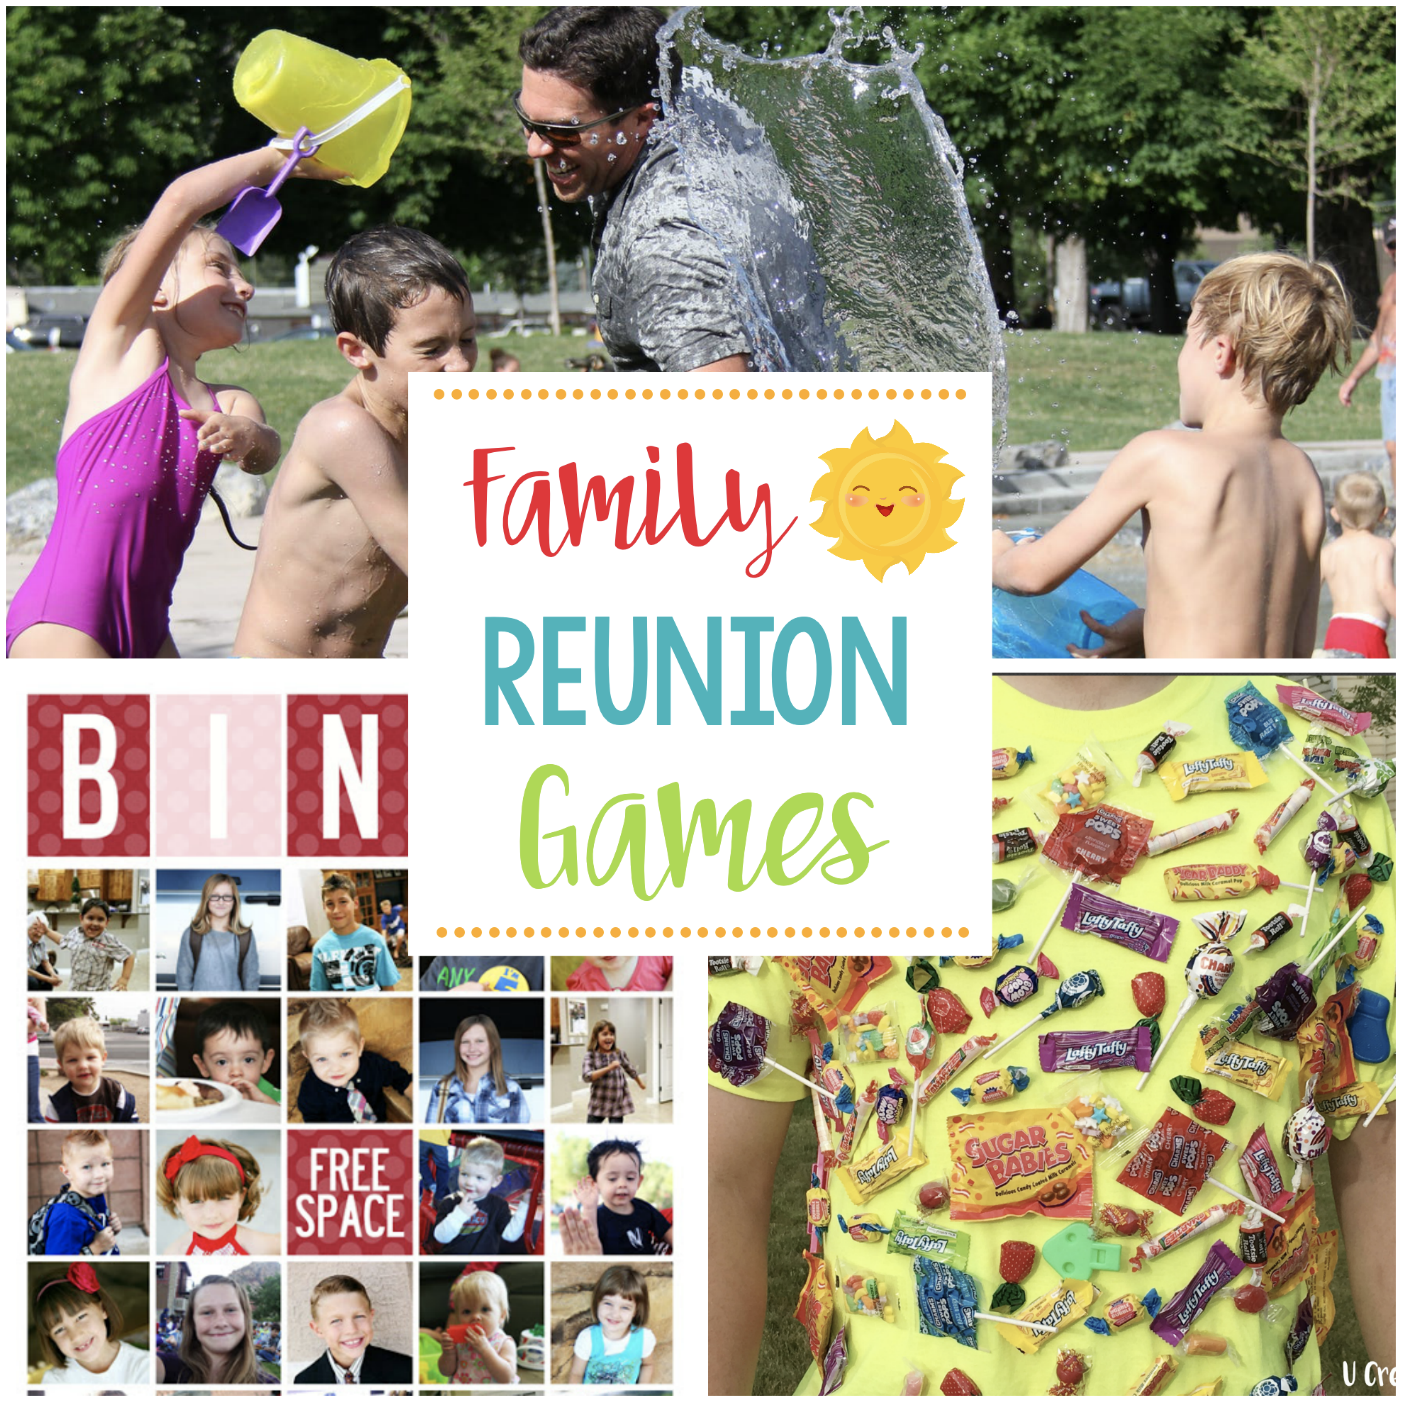 Family Reunion Trivia Game Family Gathering Party Activities